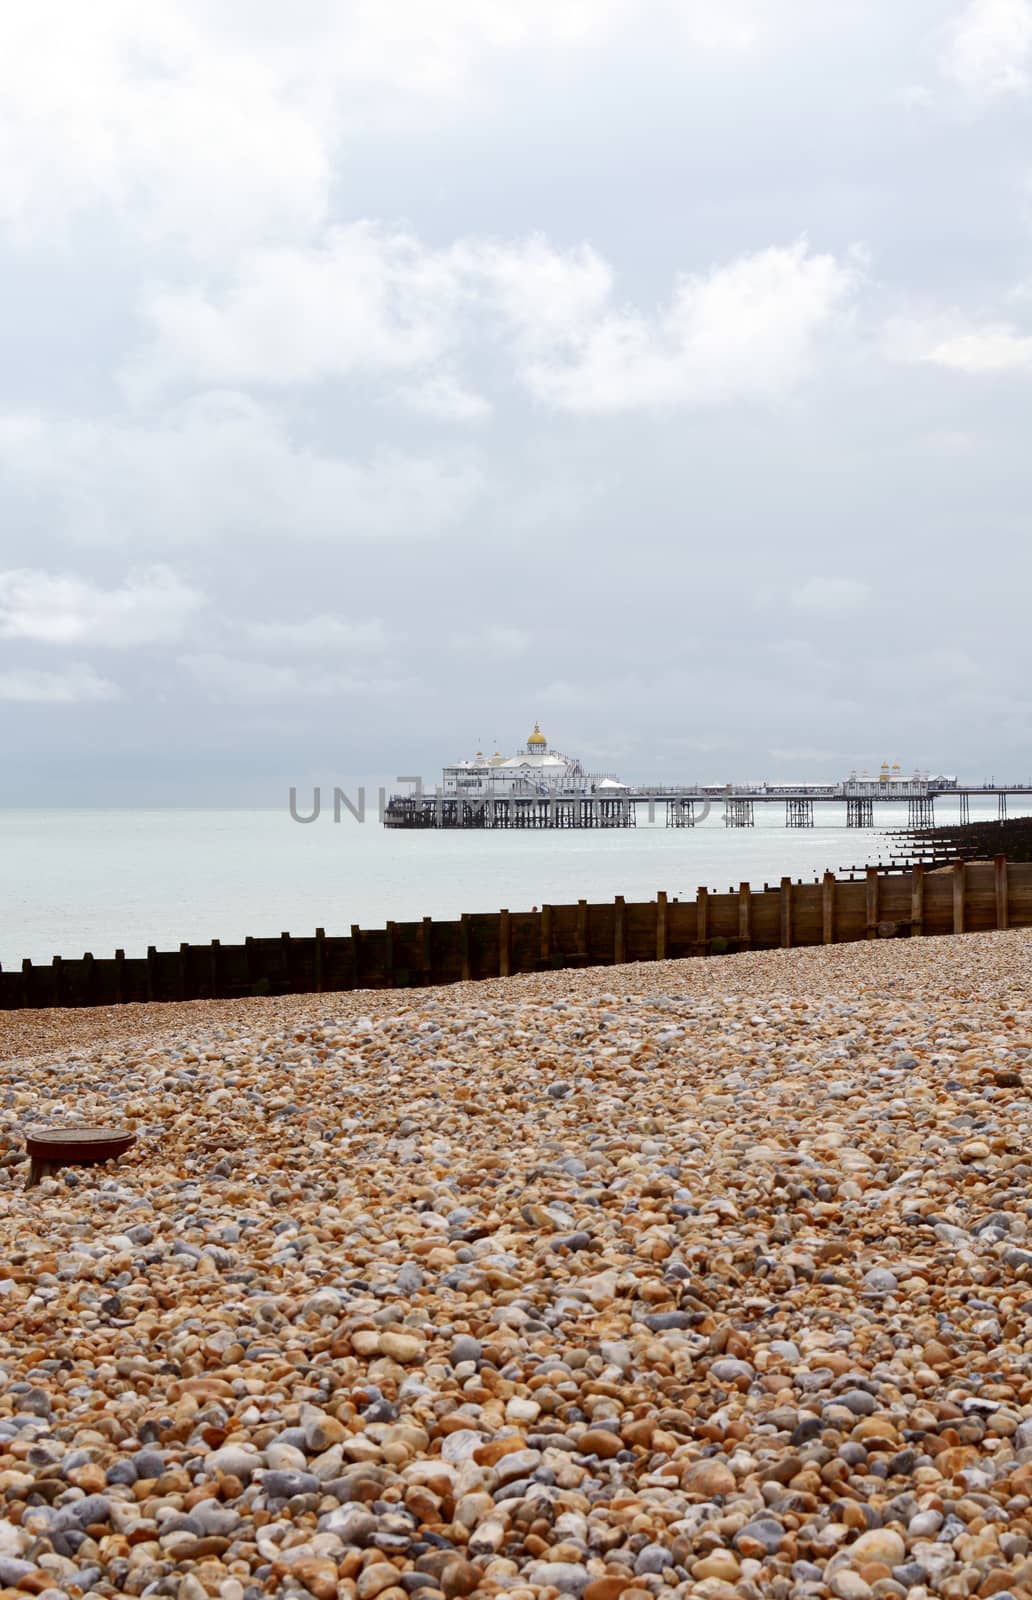 Eastbourne pleasure pier, opened in 1870, above a calm sea on the East Sussex coast, with copy space on sky and beach